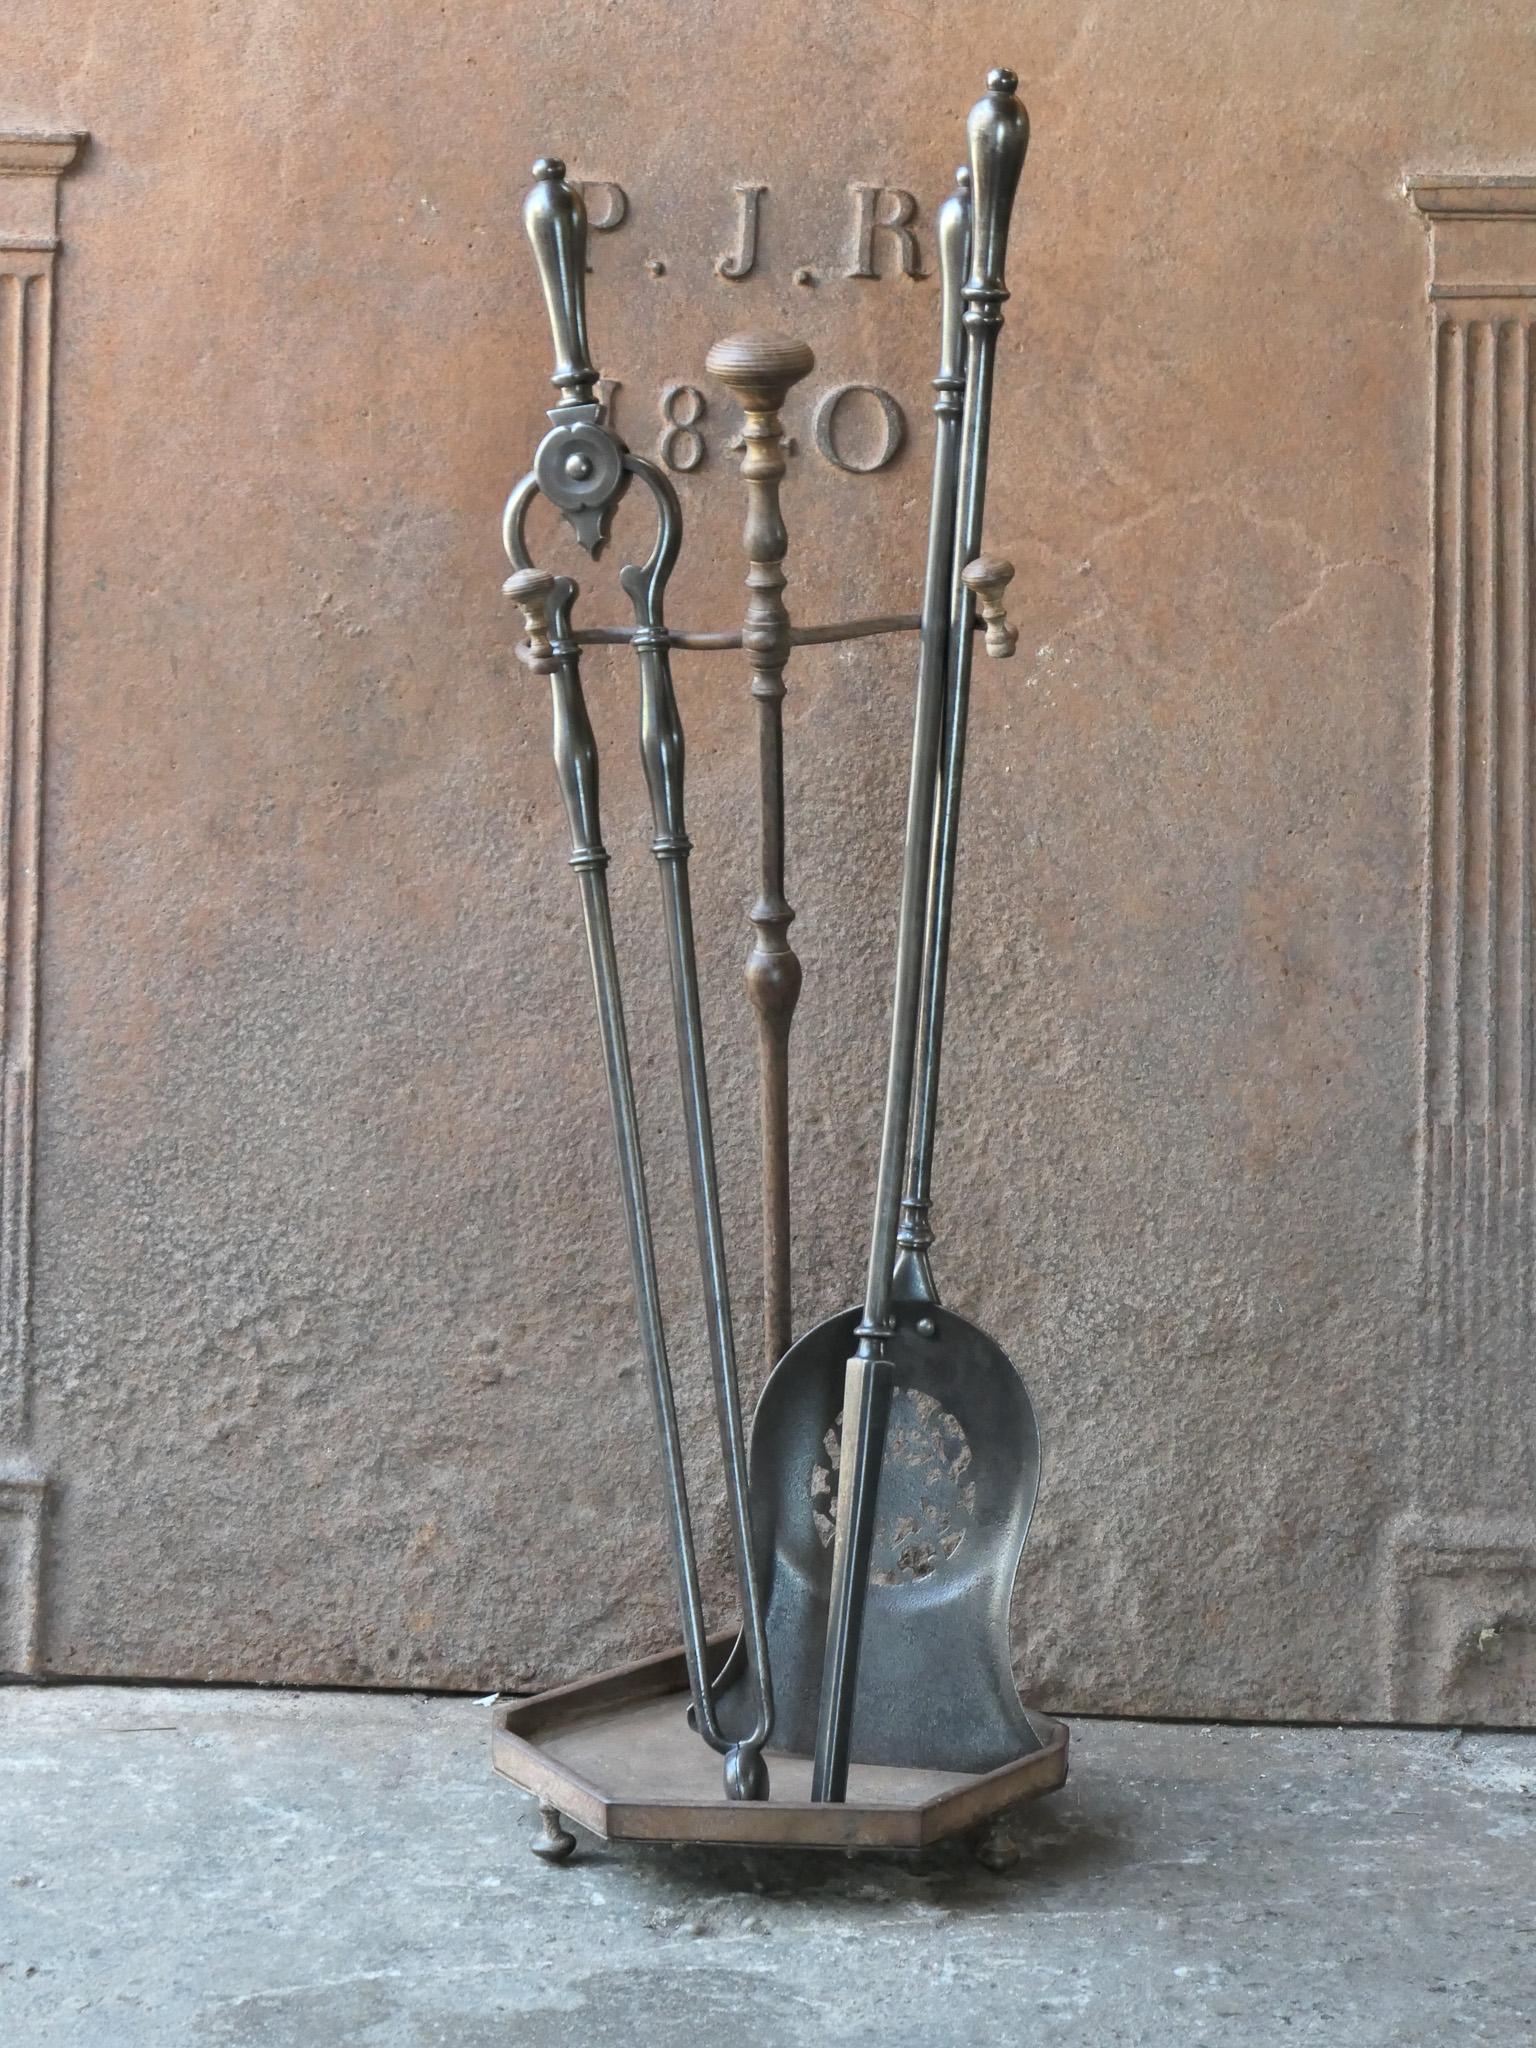 Beautiful 18th - 19th century English Georgian fireplace tool set. The tool set consists of tongs, shovel, poker and stand. The stand is made of wrought iron and the tools are made of polished steel. The set is in a good condition and fit for use in